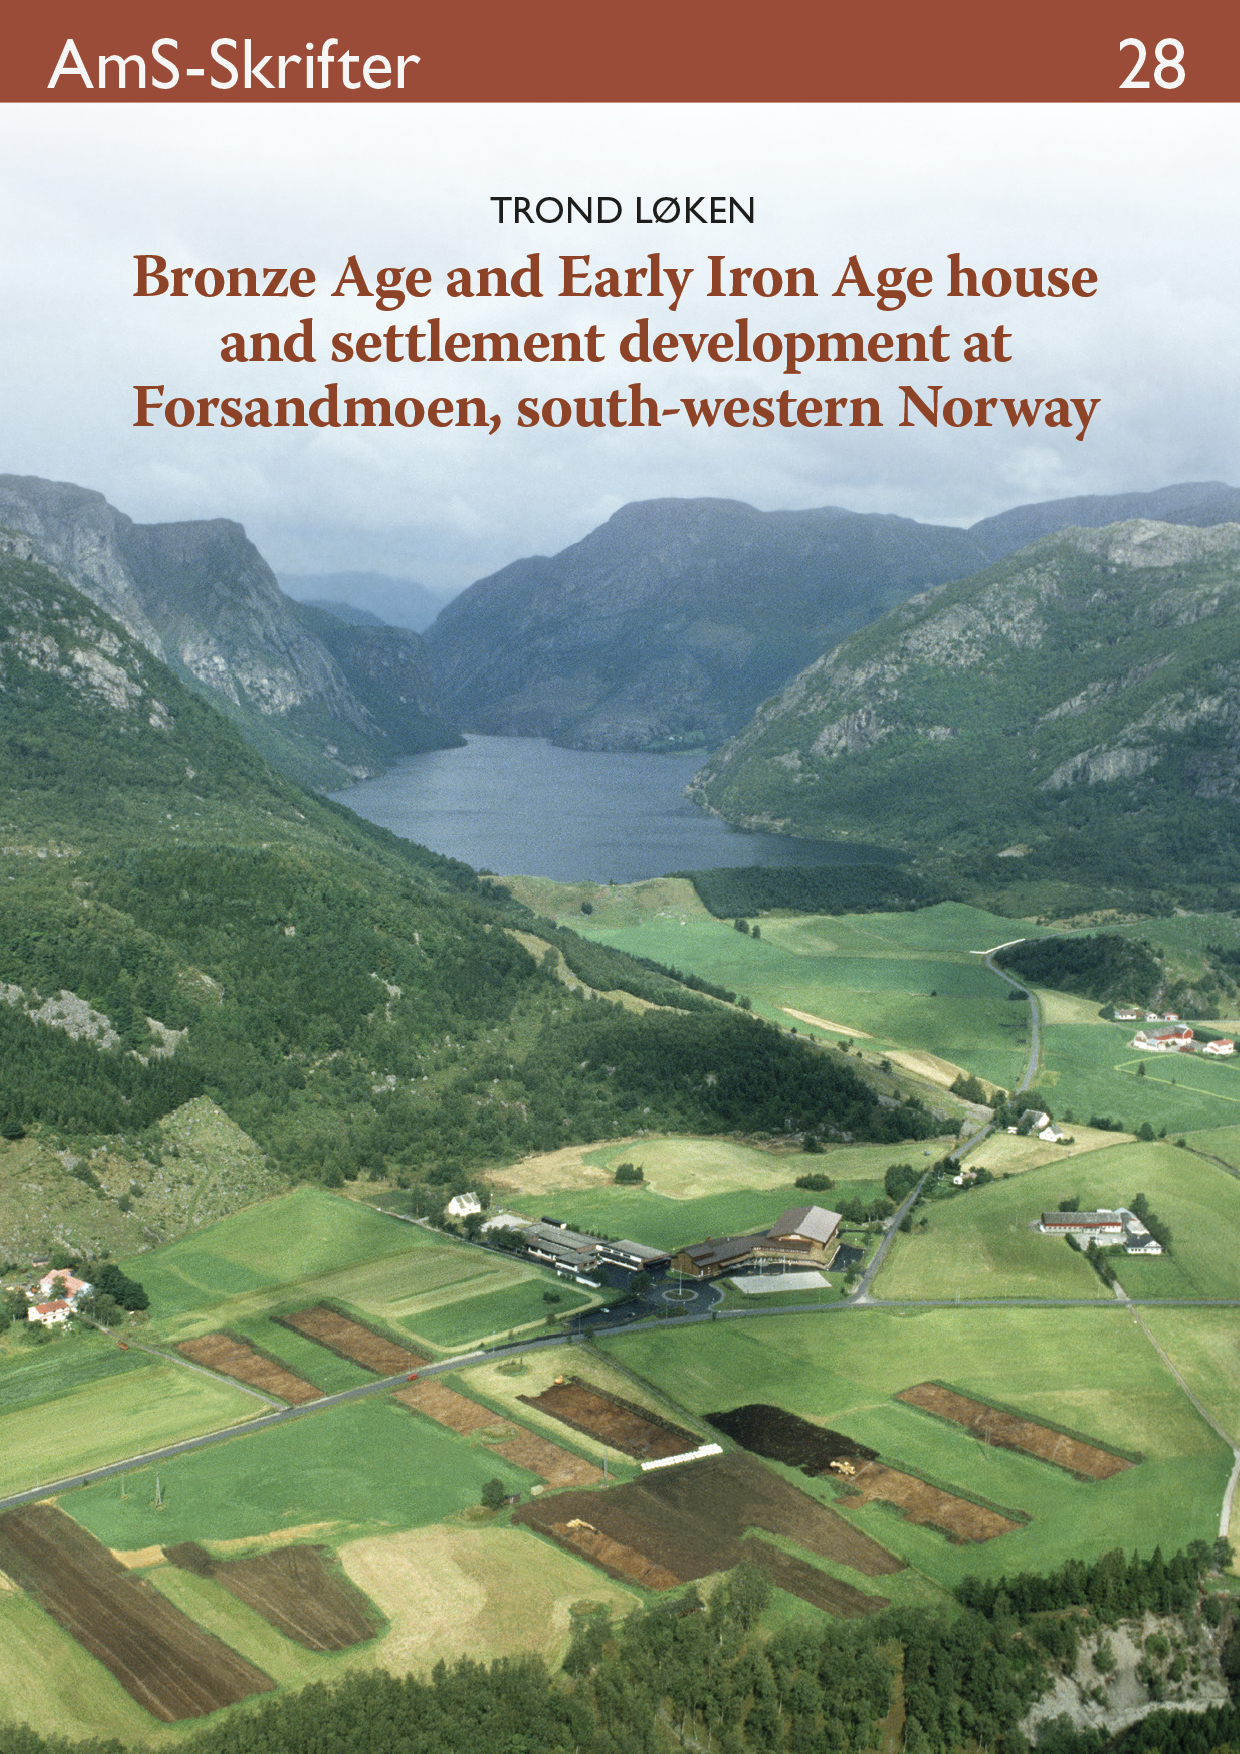 					View No. 28 (2020): Bronze Age and Early Iron Age house and settlement development at Forsandmoen, south-western Norway
				